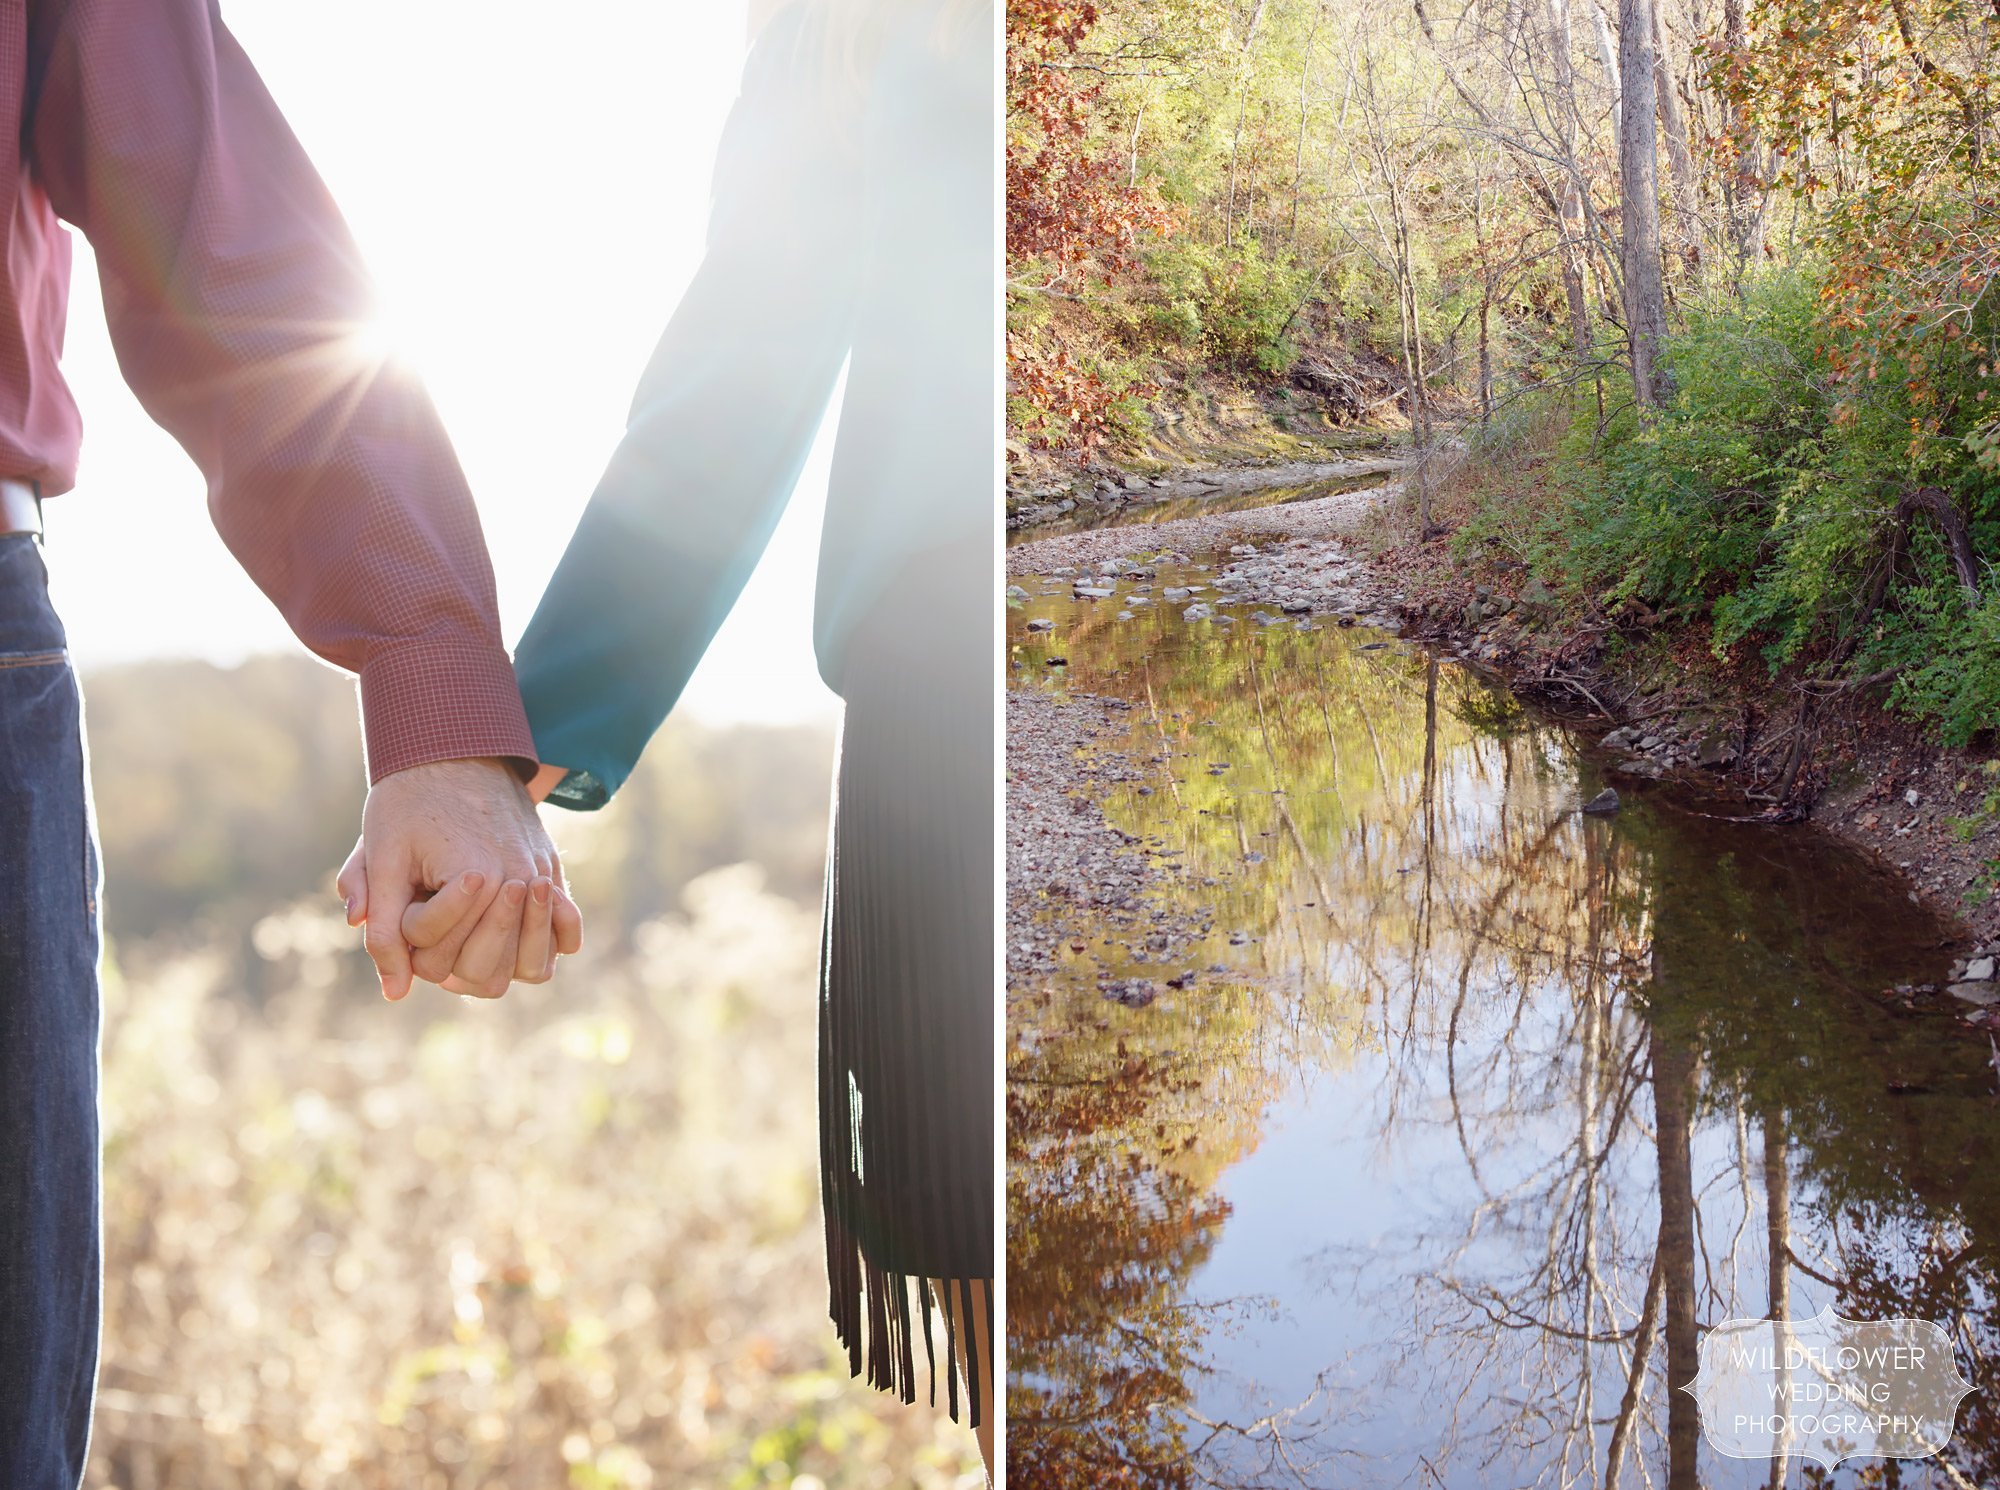 Couple holding hands next to Grindstone creek during their Anthropologie style engagement photography session outdoors in sunbursty light.